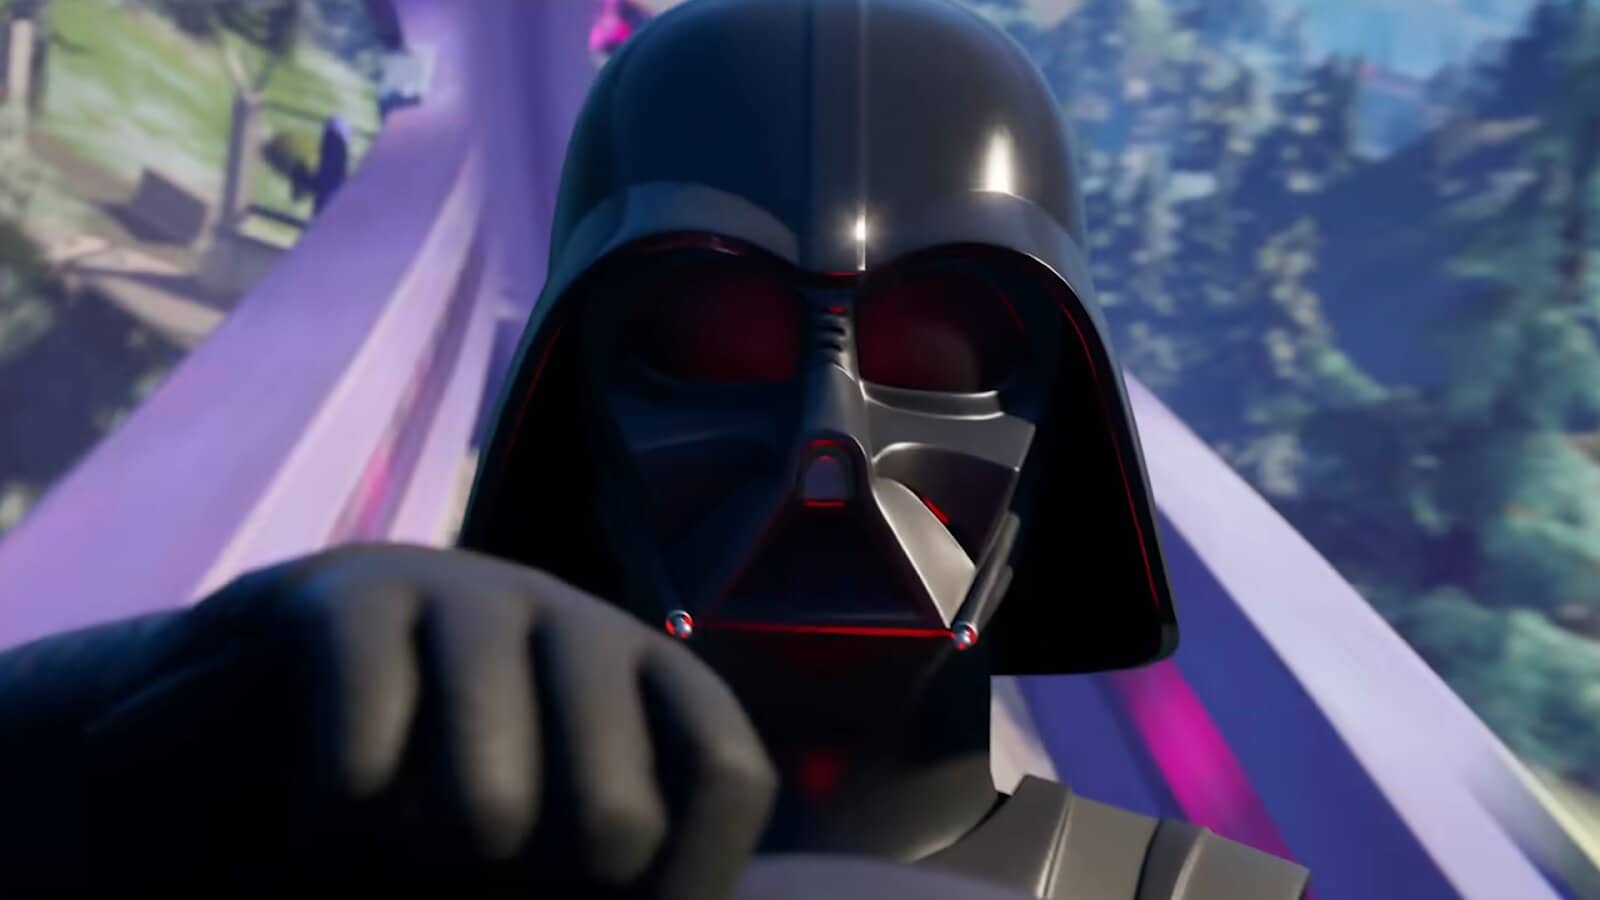 Where is Darth Vader in Fortnite?